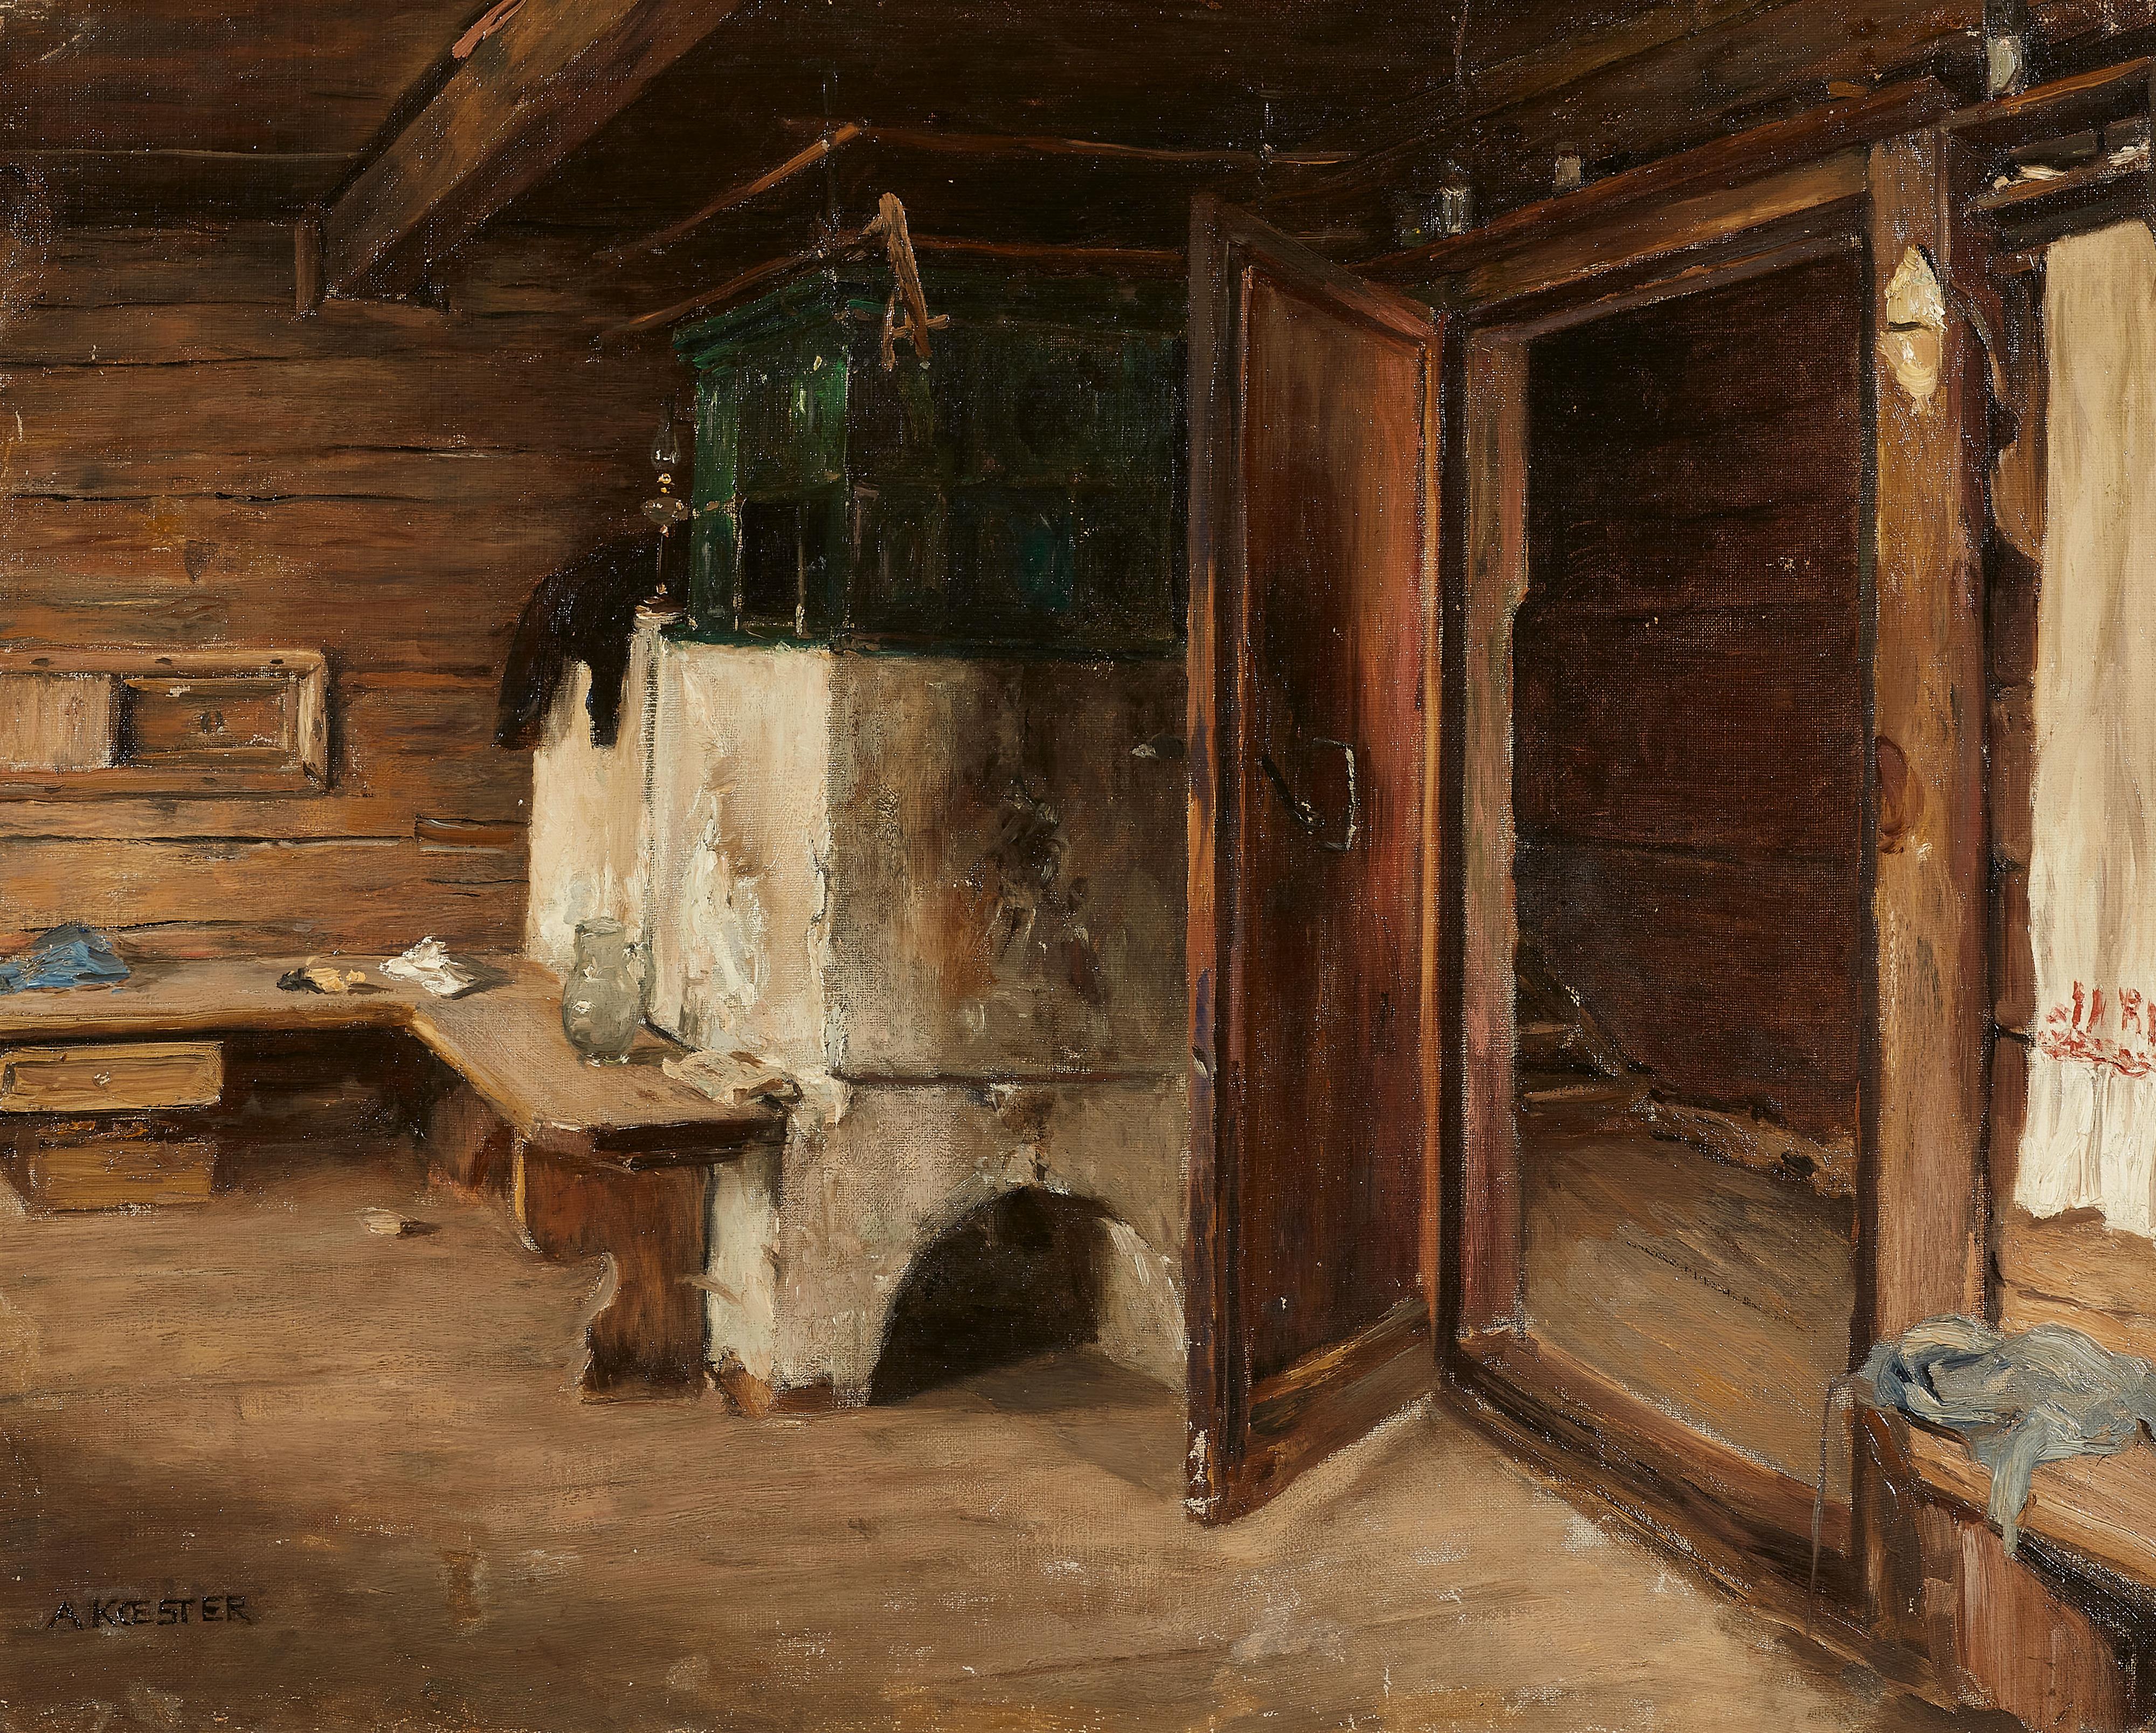 Alexander Koester - Cottage Interior with a Green Oven - image-1